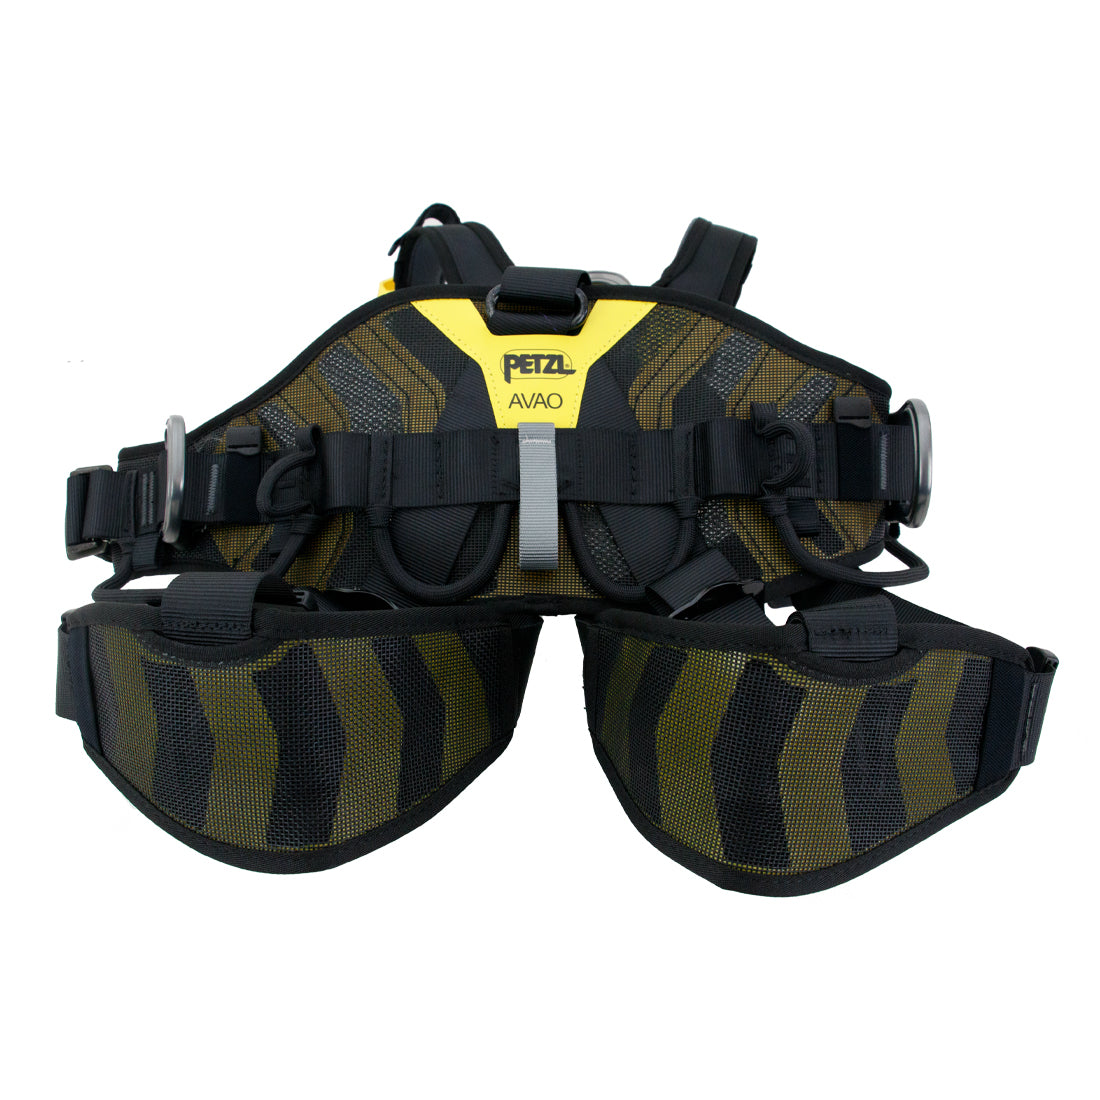 Petzl AVAO Harness Side View